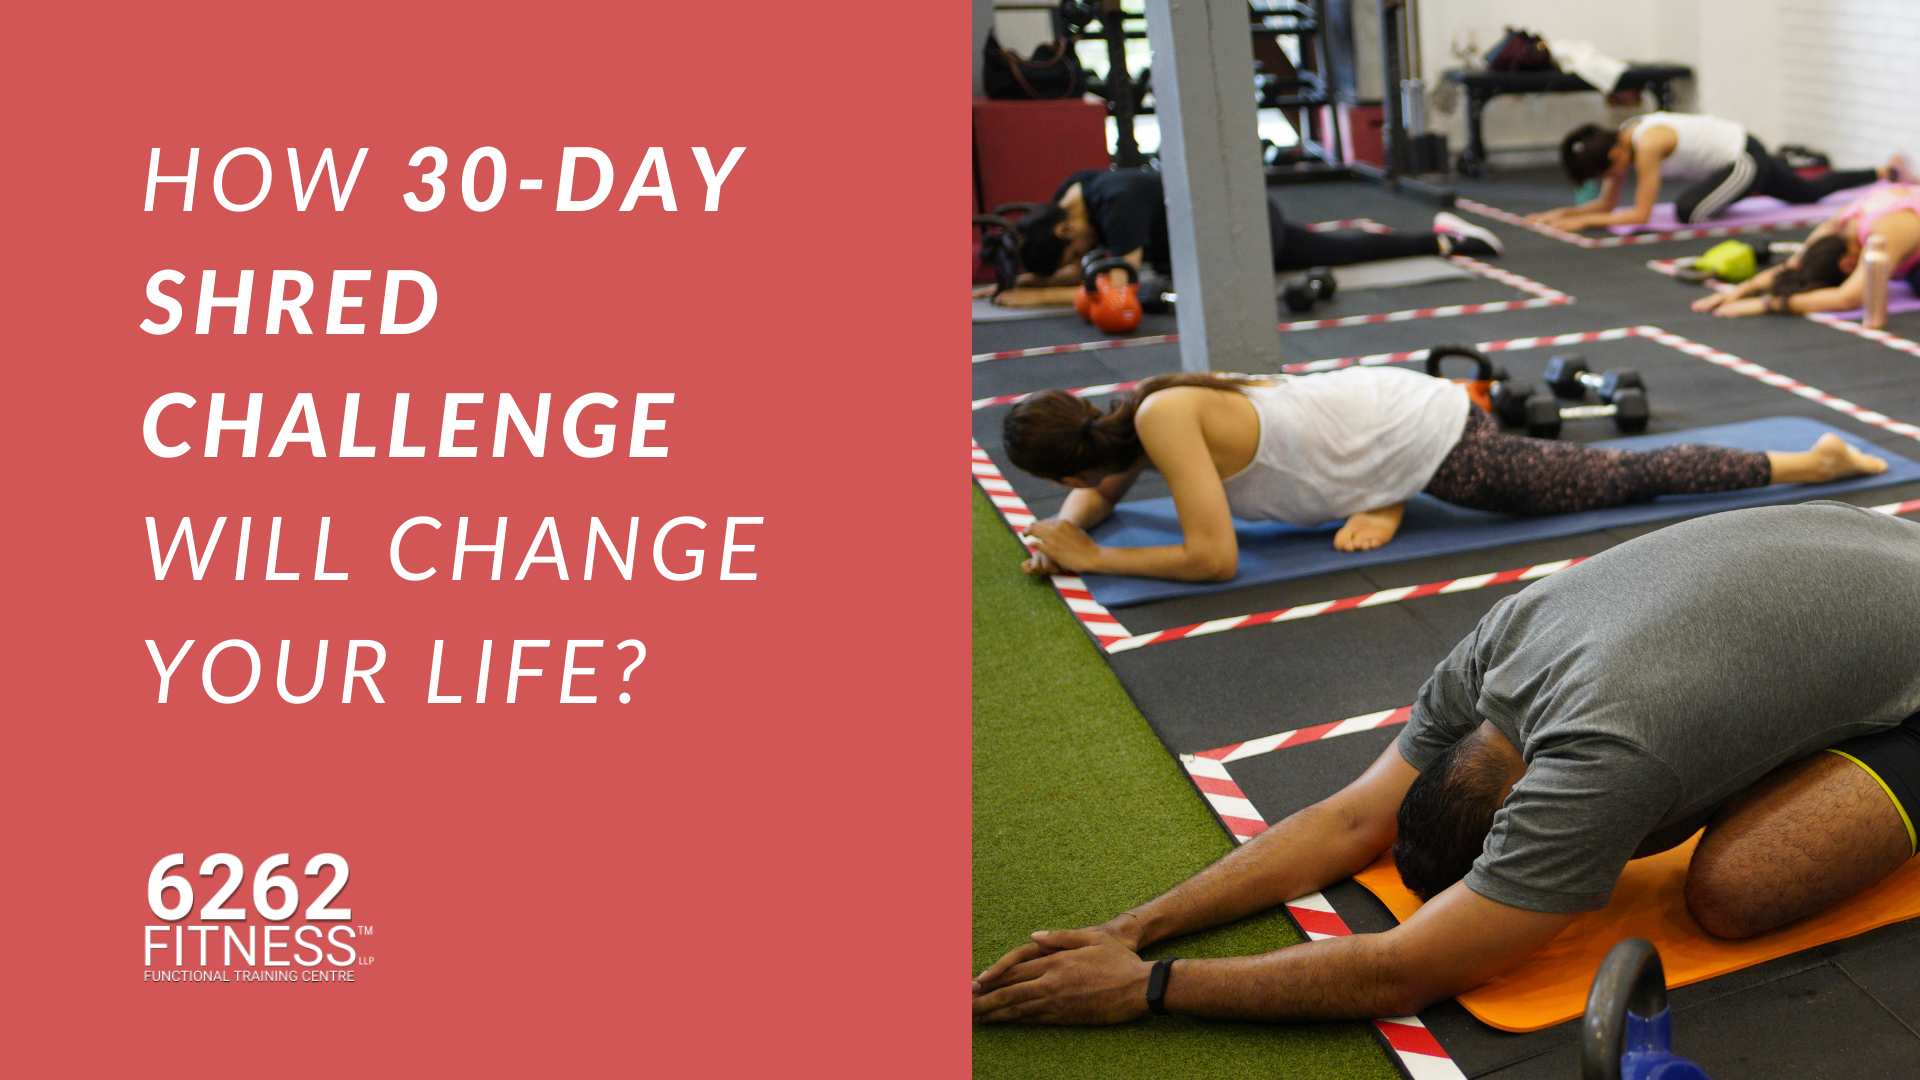 How 30-day Shred Challenge will change your life?